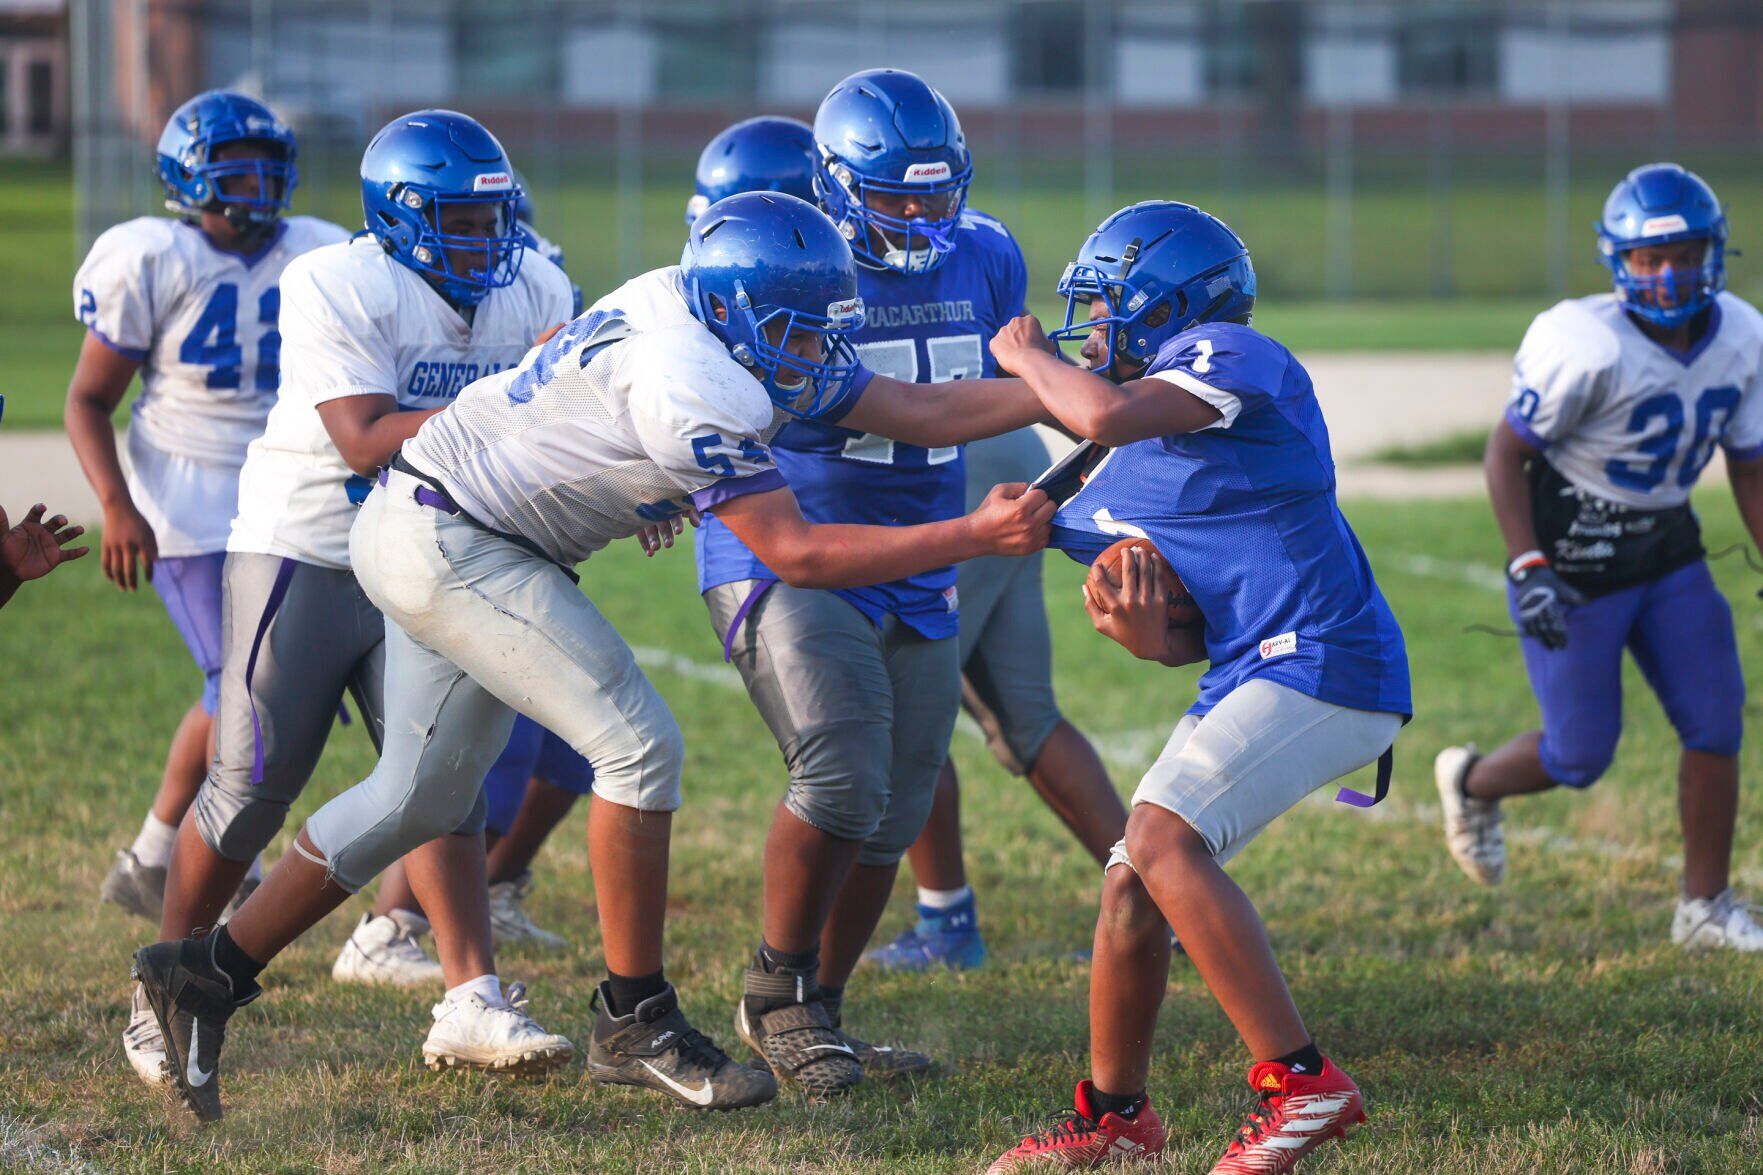 MacArthur football’s opener delayed due to heat